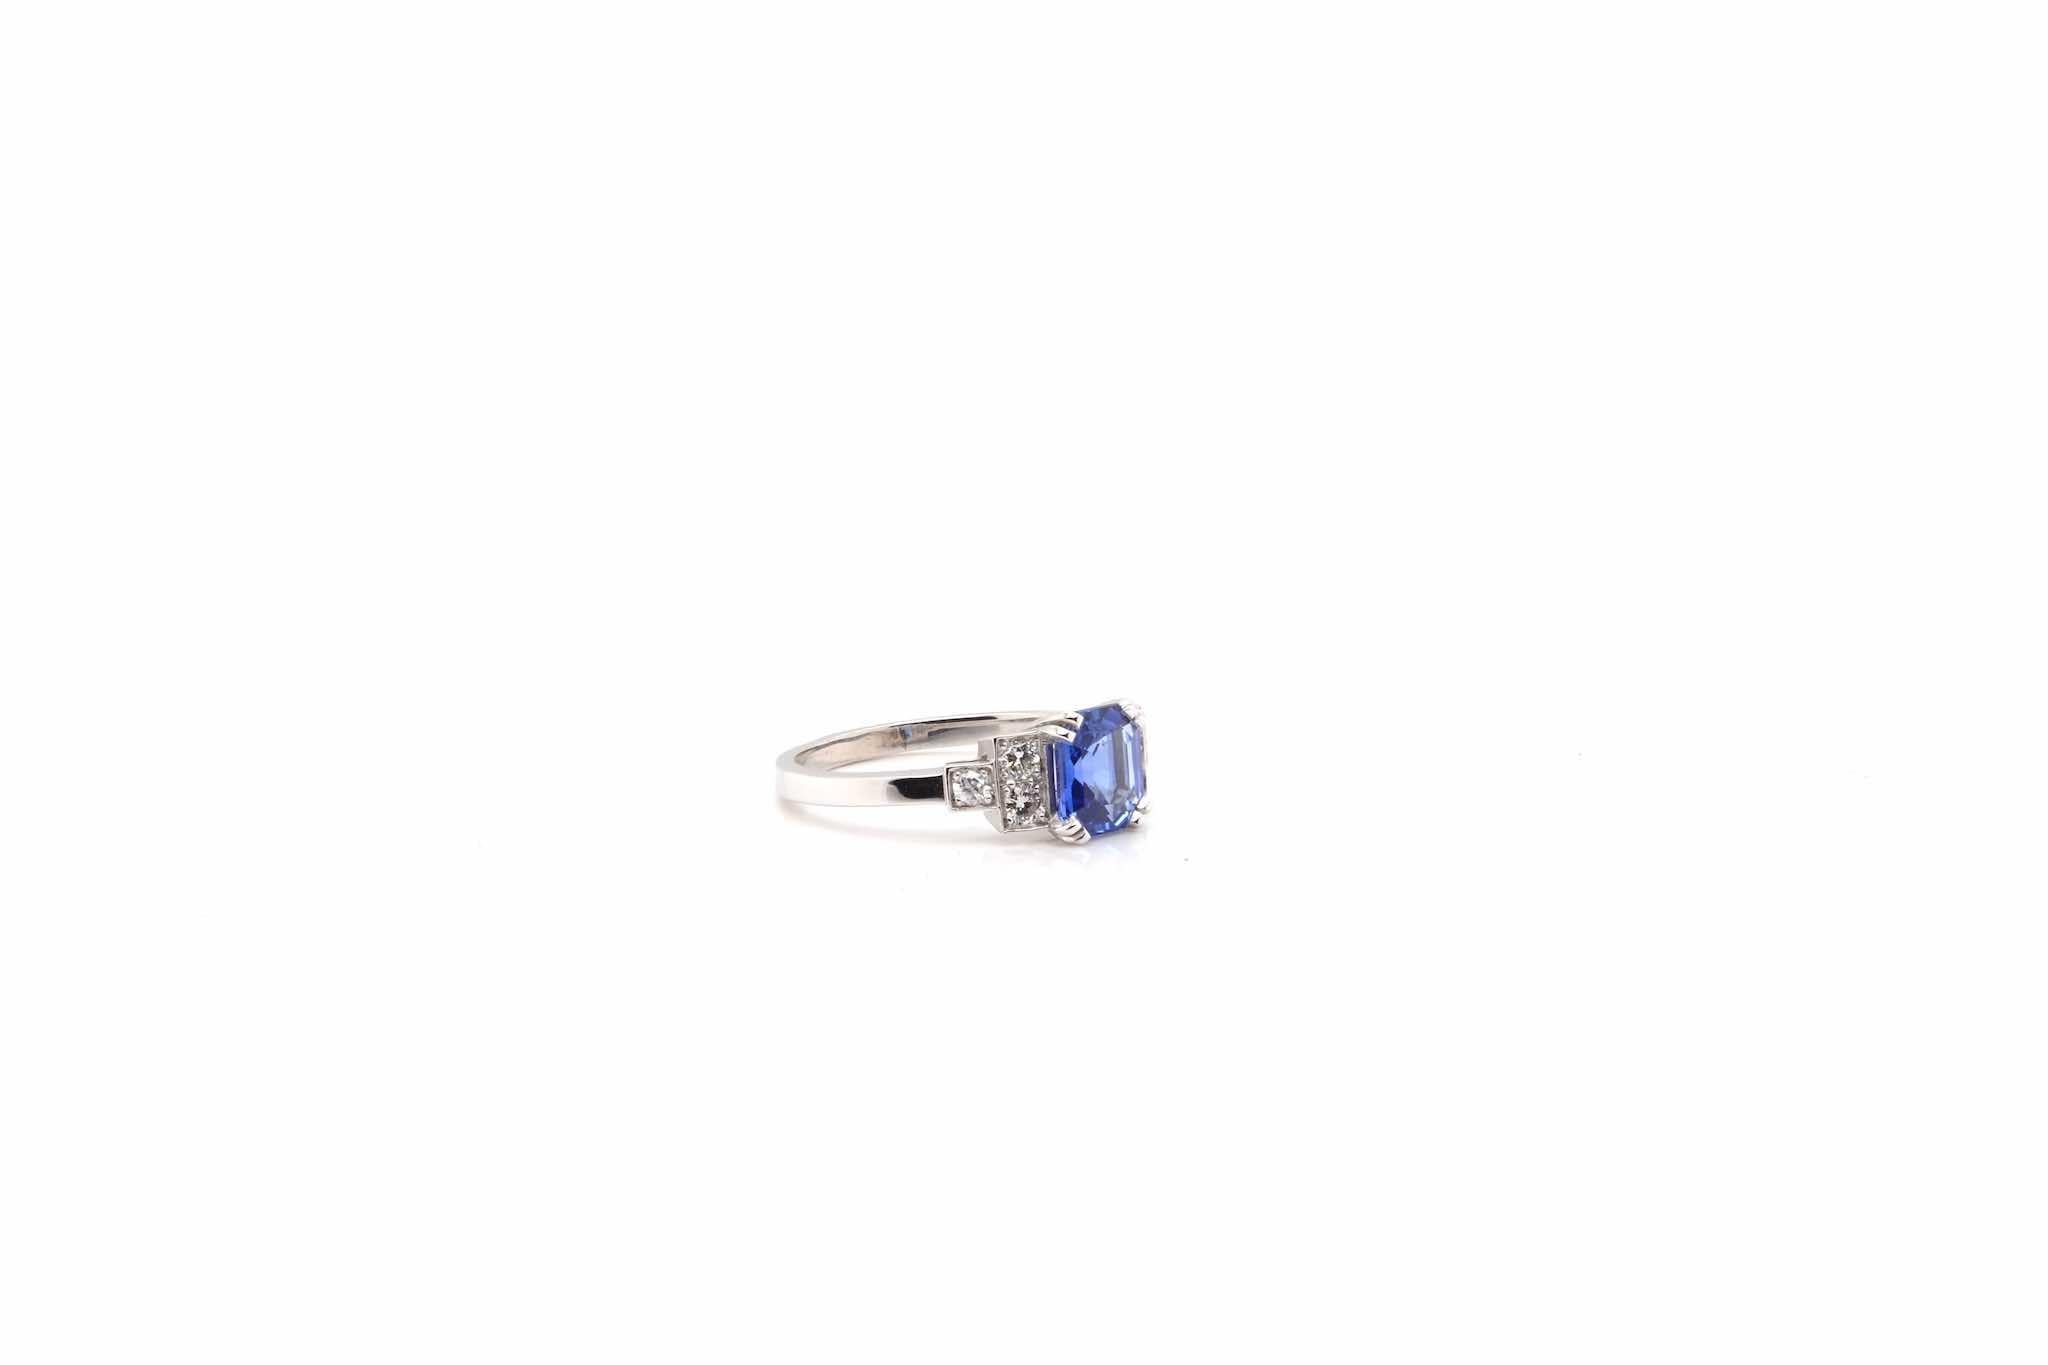 Emerald Cut 1.69 carats Ceylon Sapphire ring with diamonds in platinum For Sale